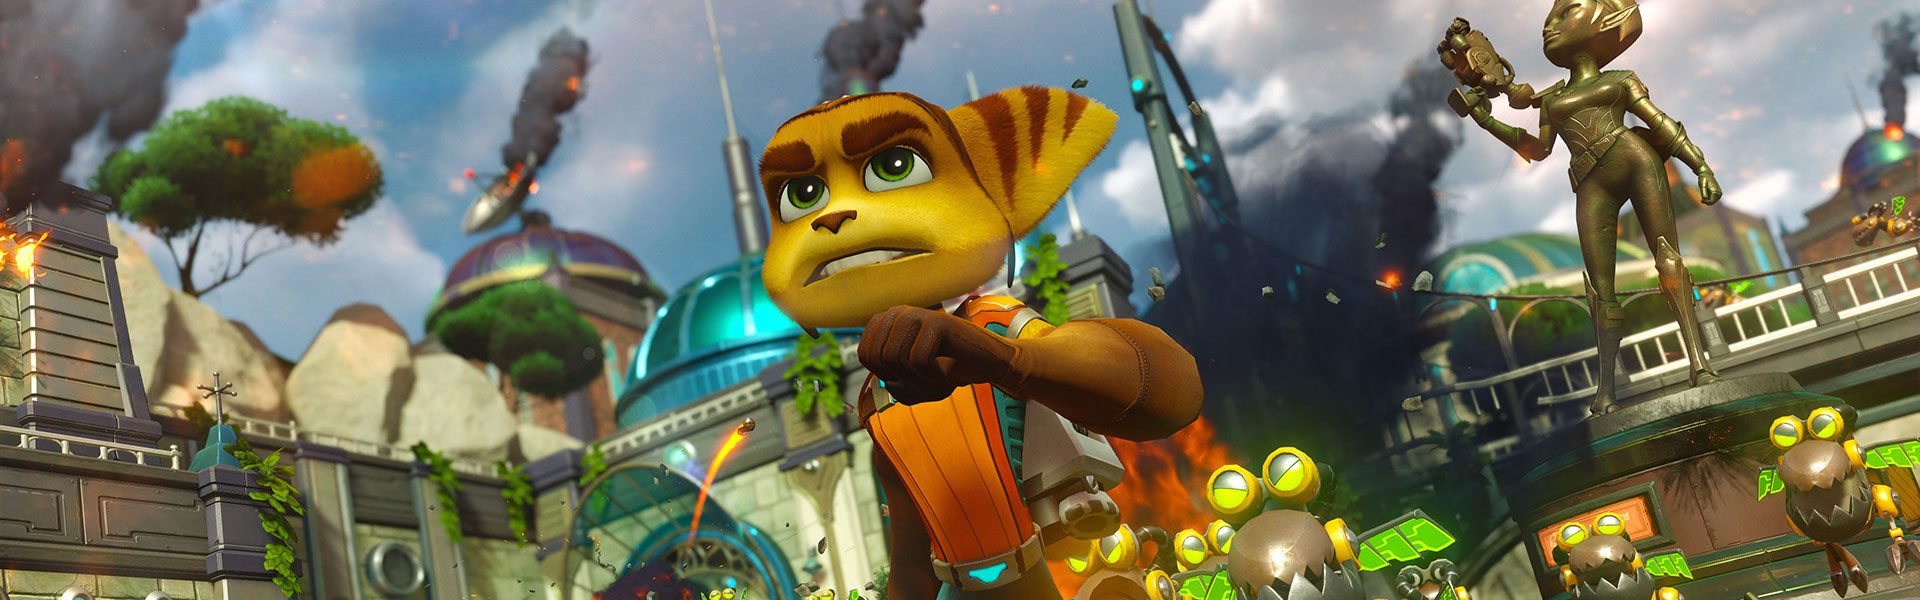 psn store ratchet and clank